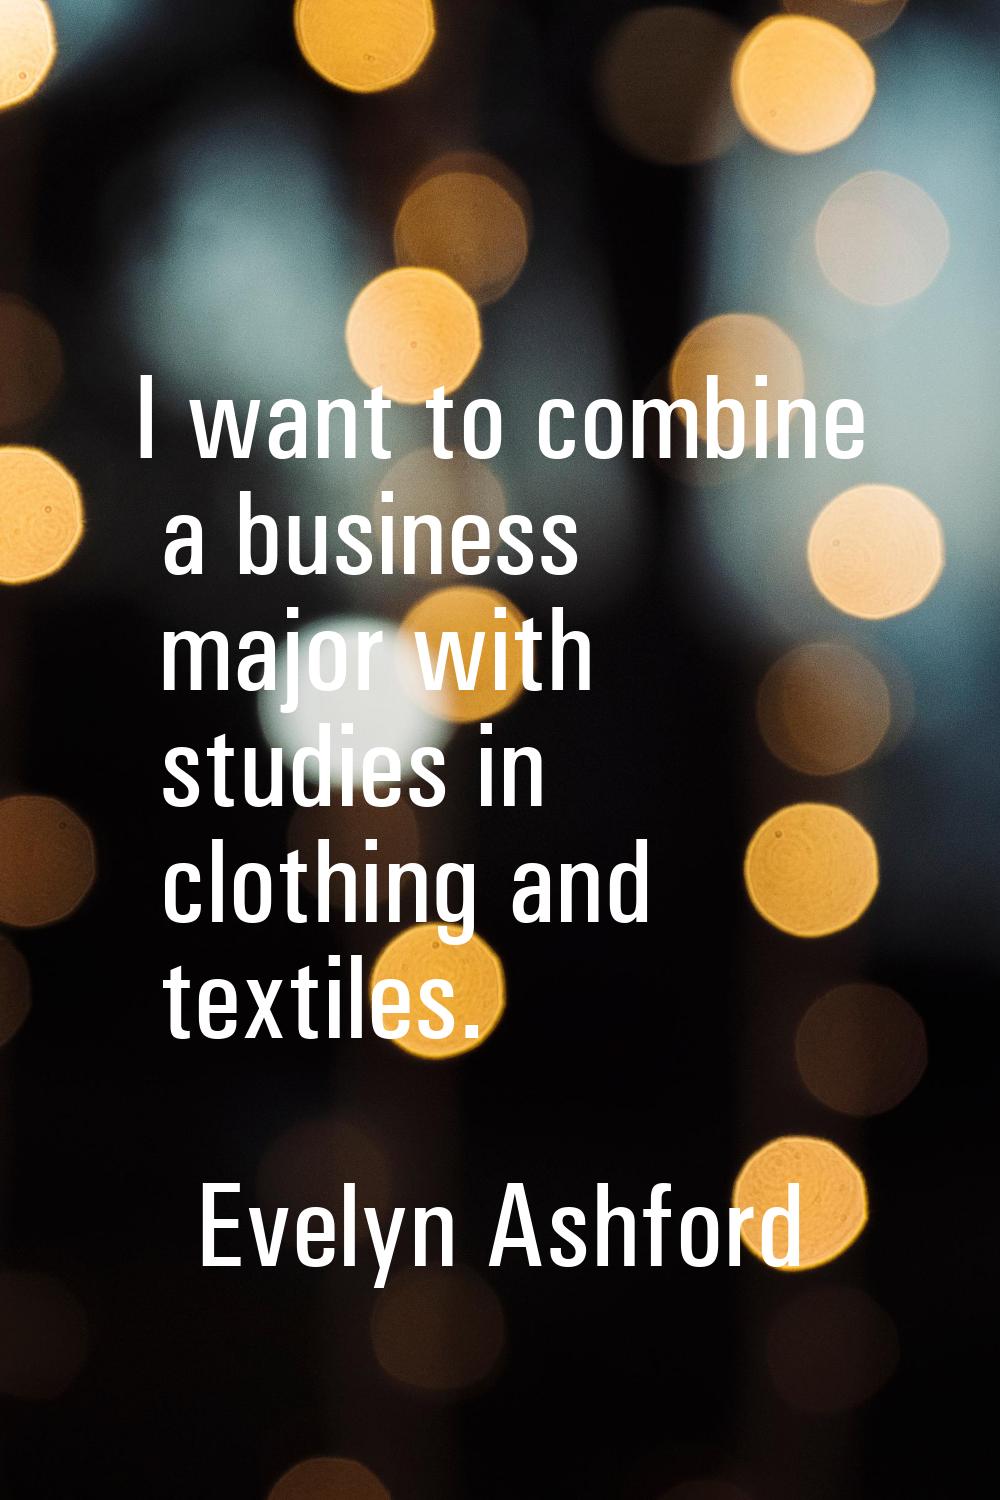 I want to combine a business major with studies in clothing and textiles.